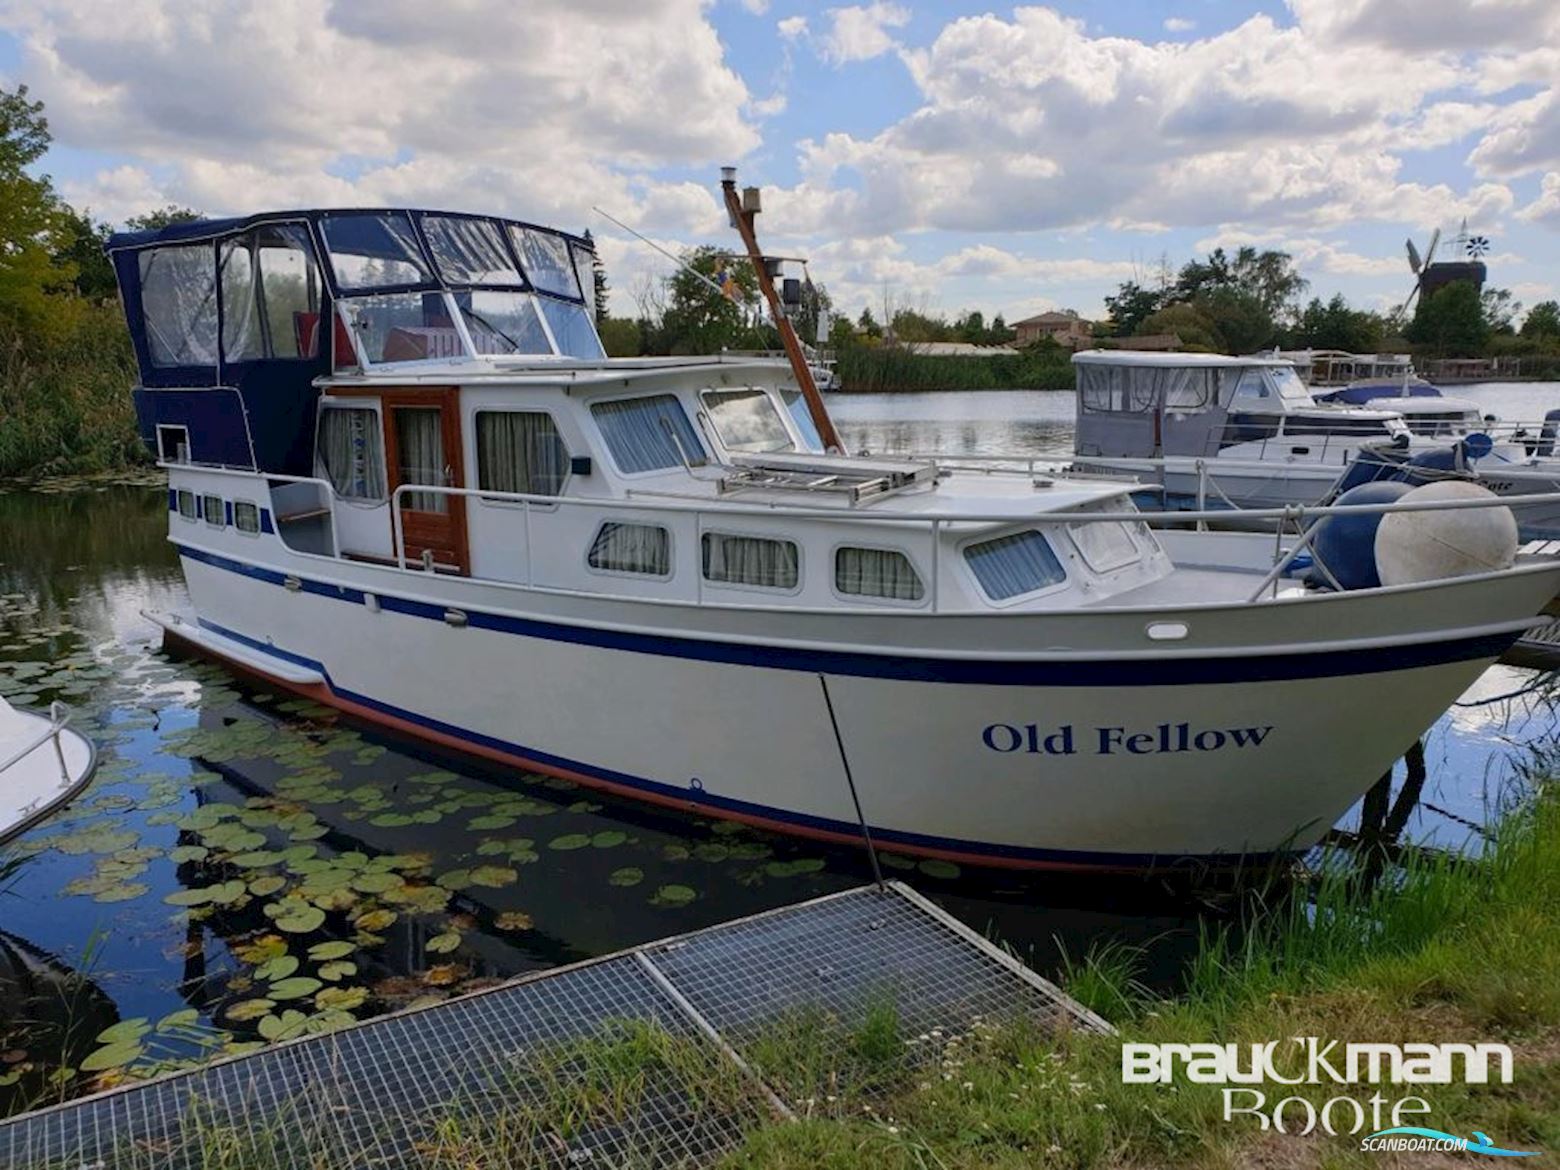 Gruno 10.50 Motor boat 1988, with Ford engine, Germany